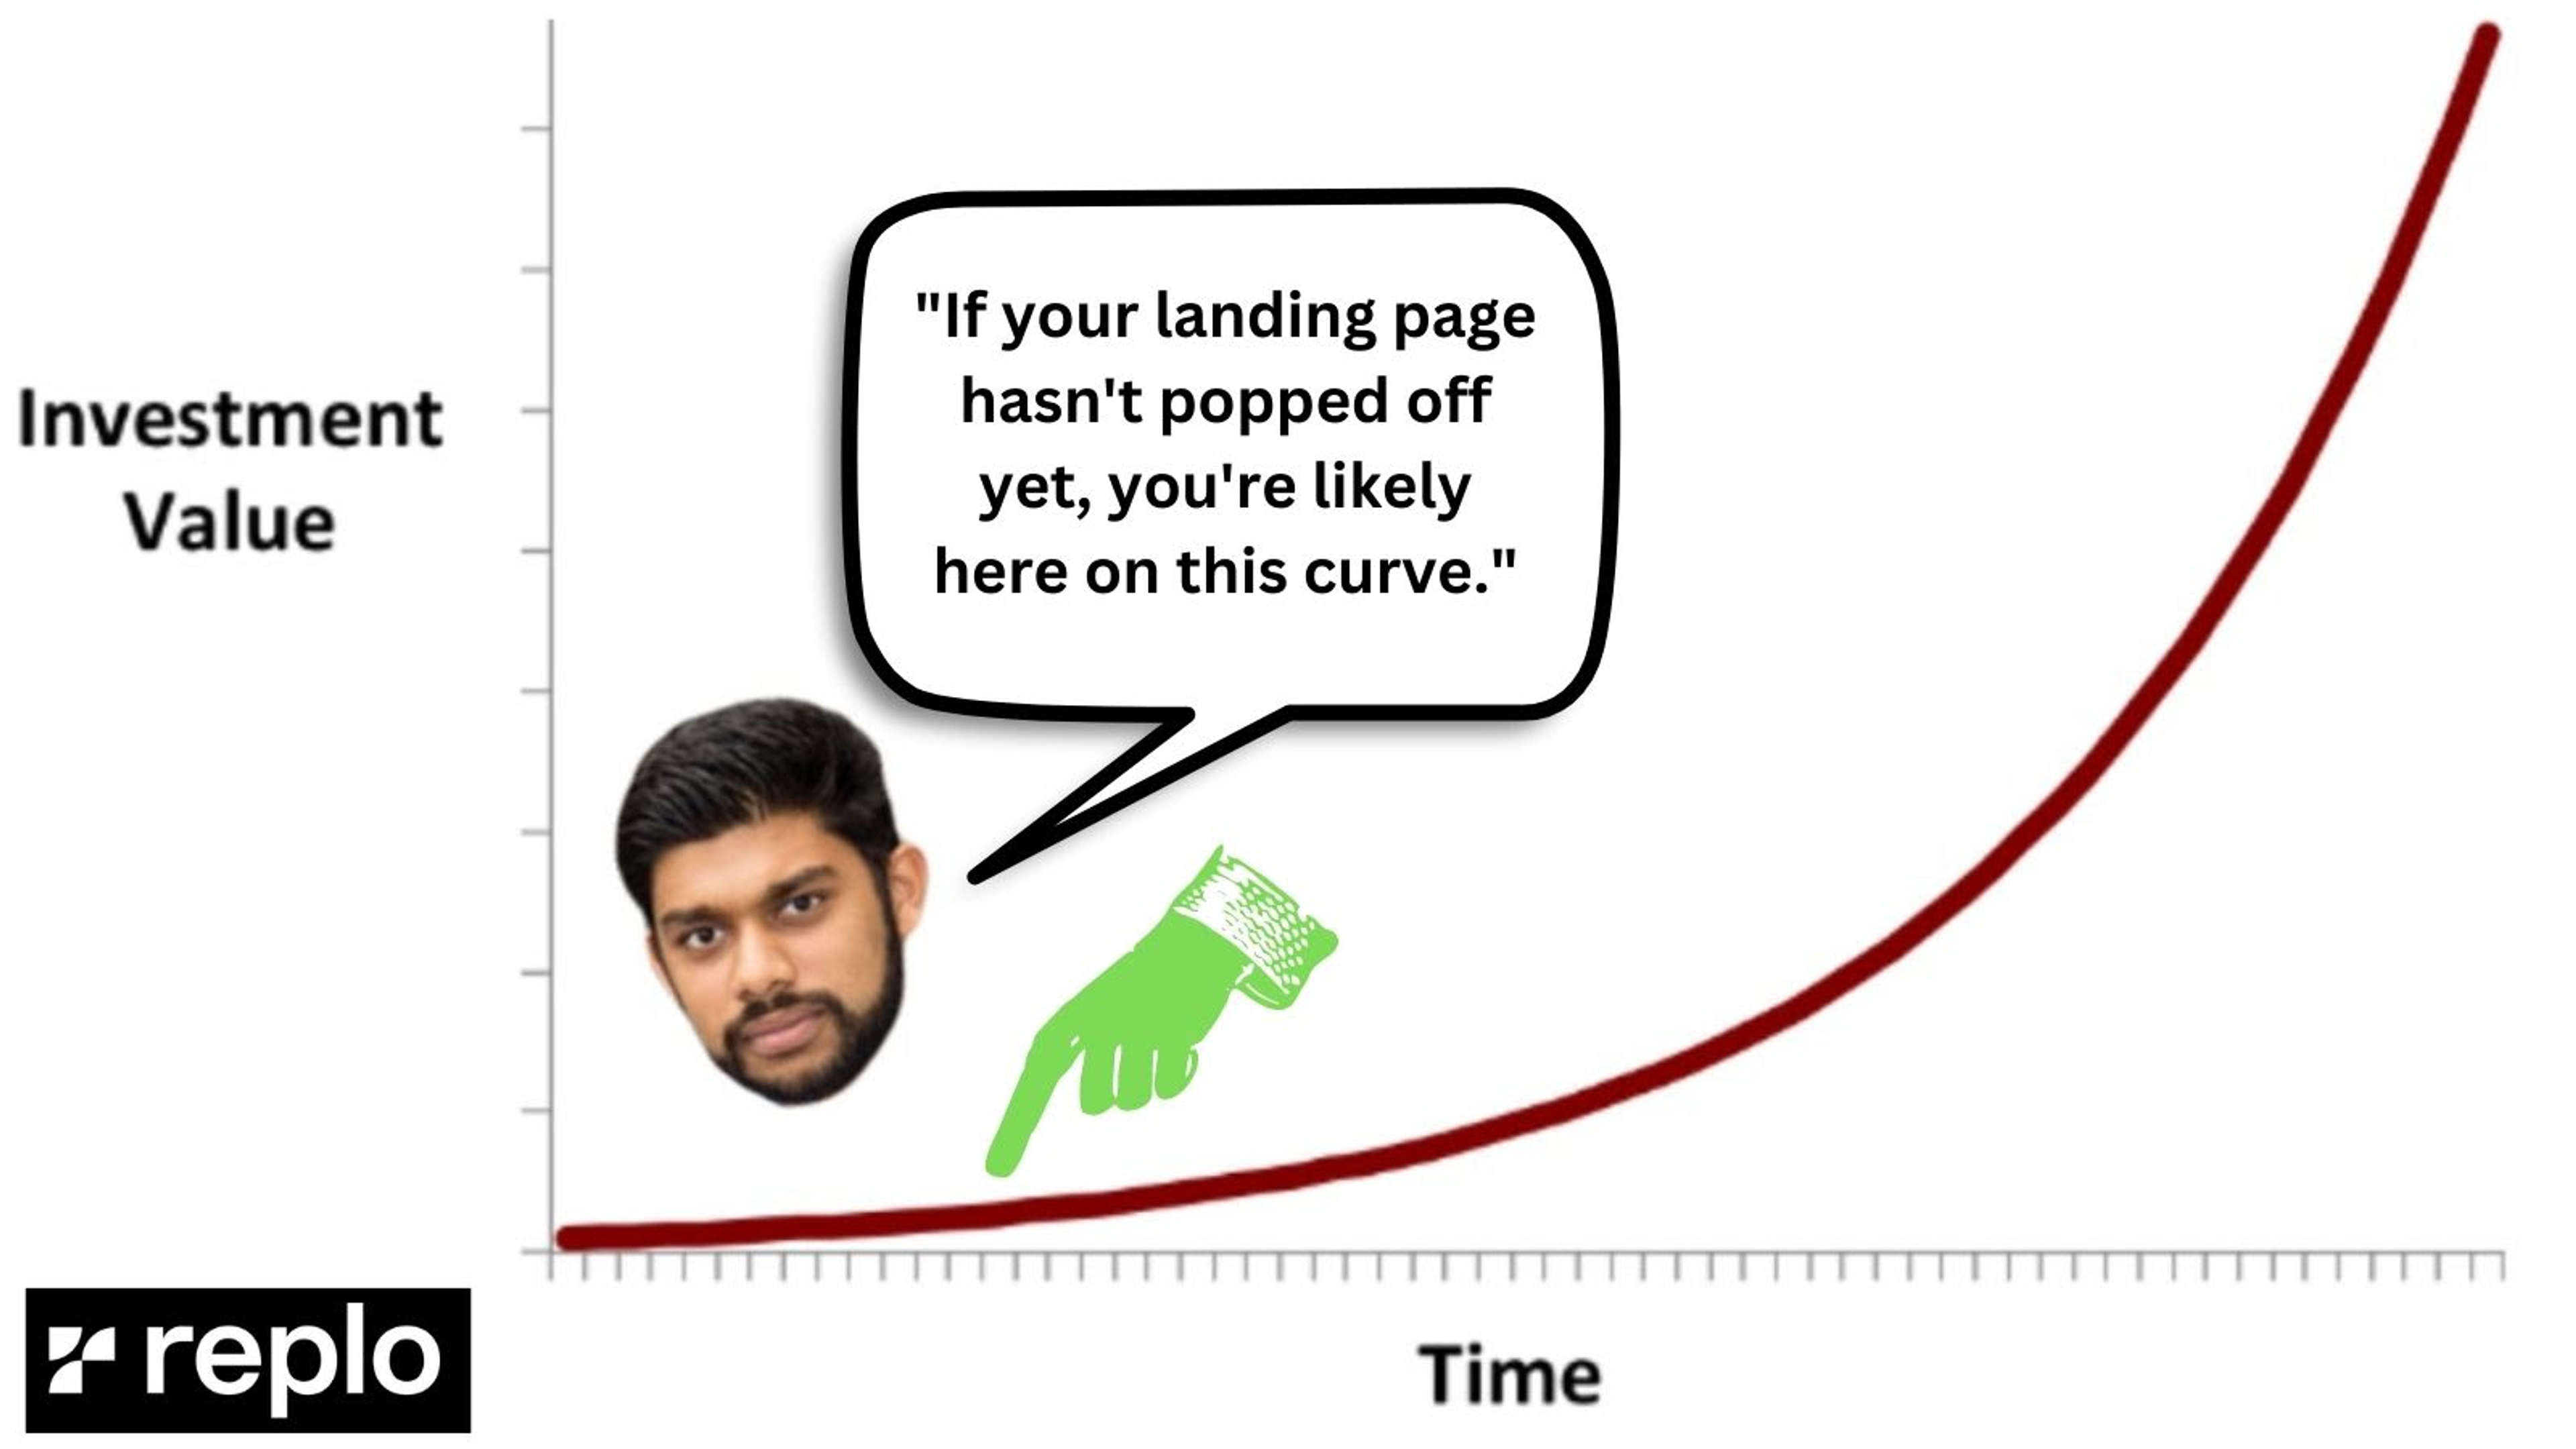 Take an honest assessment of your landing page.